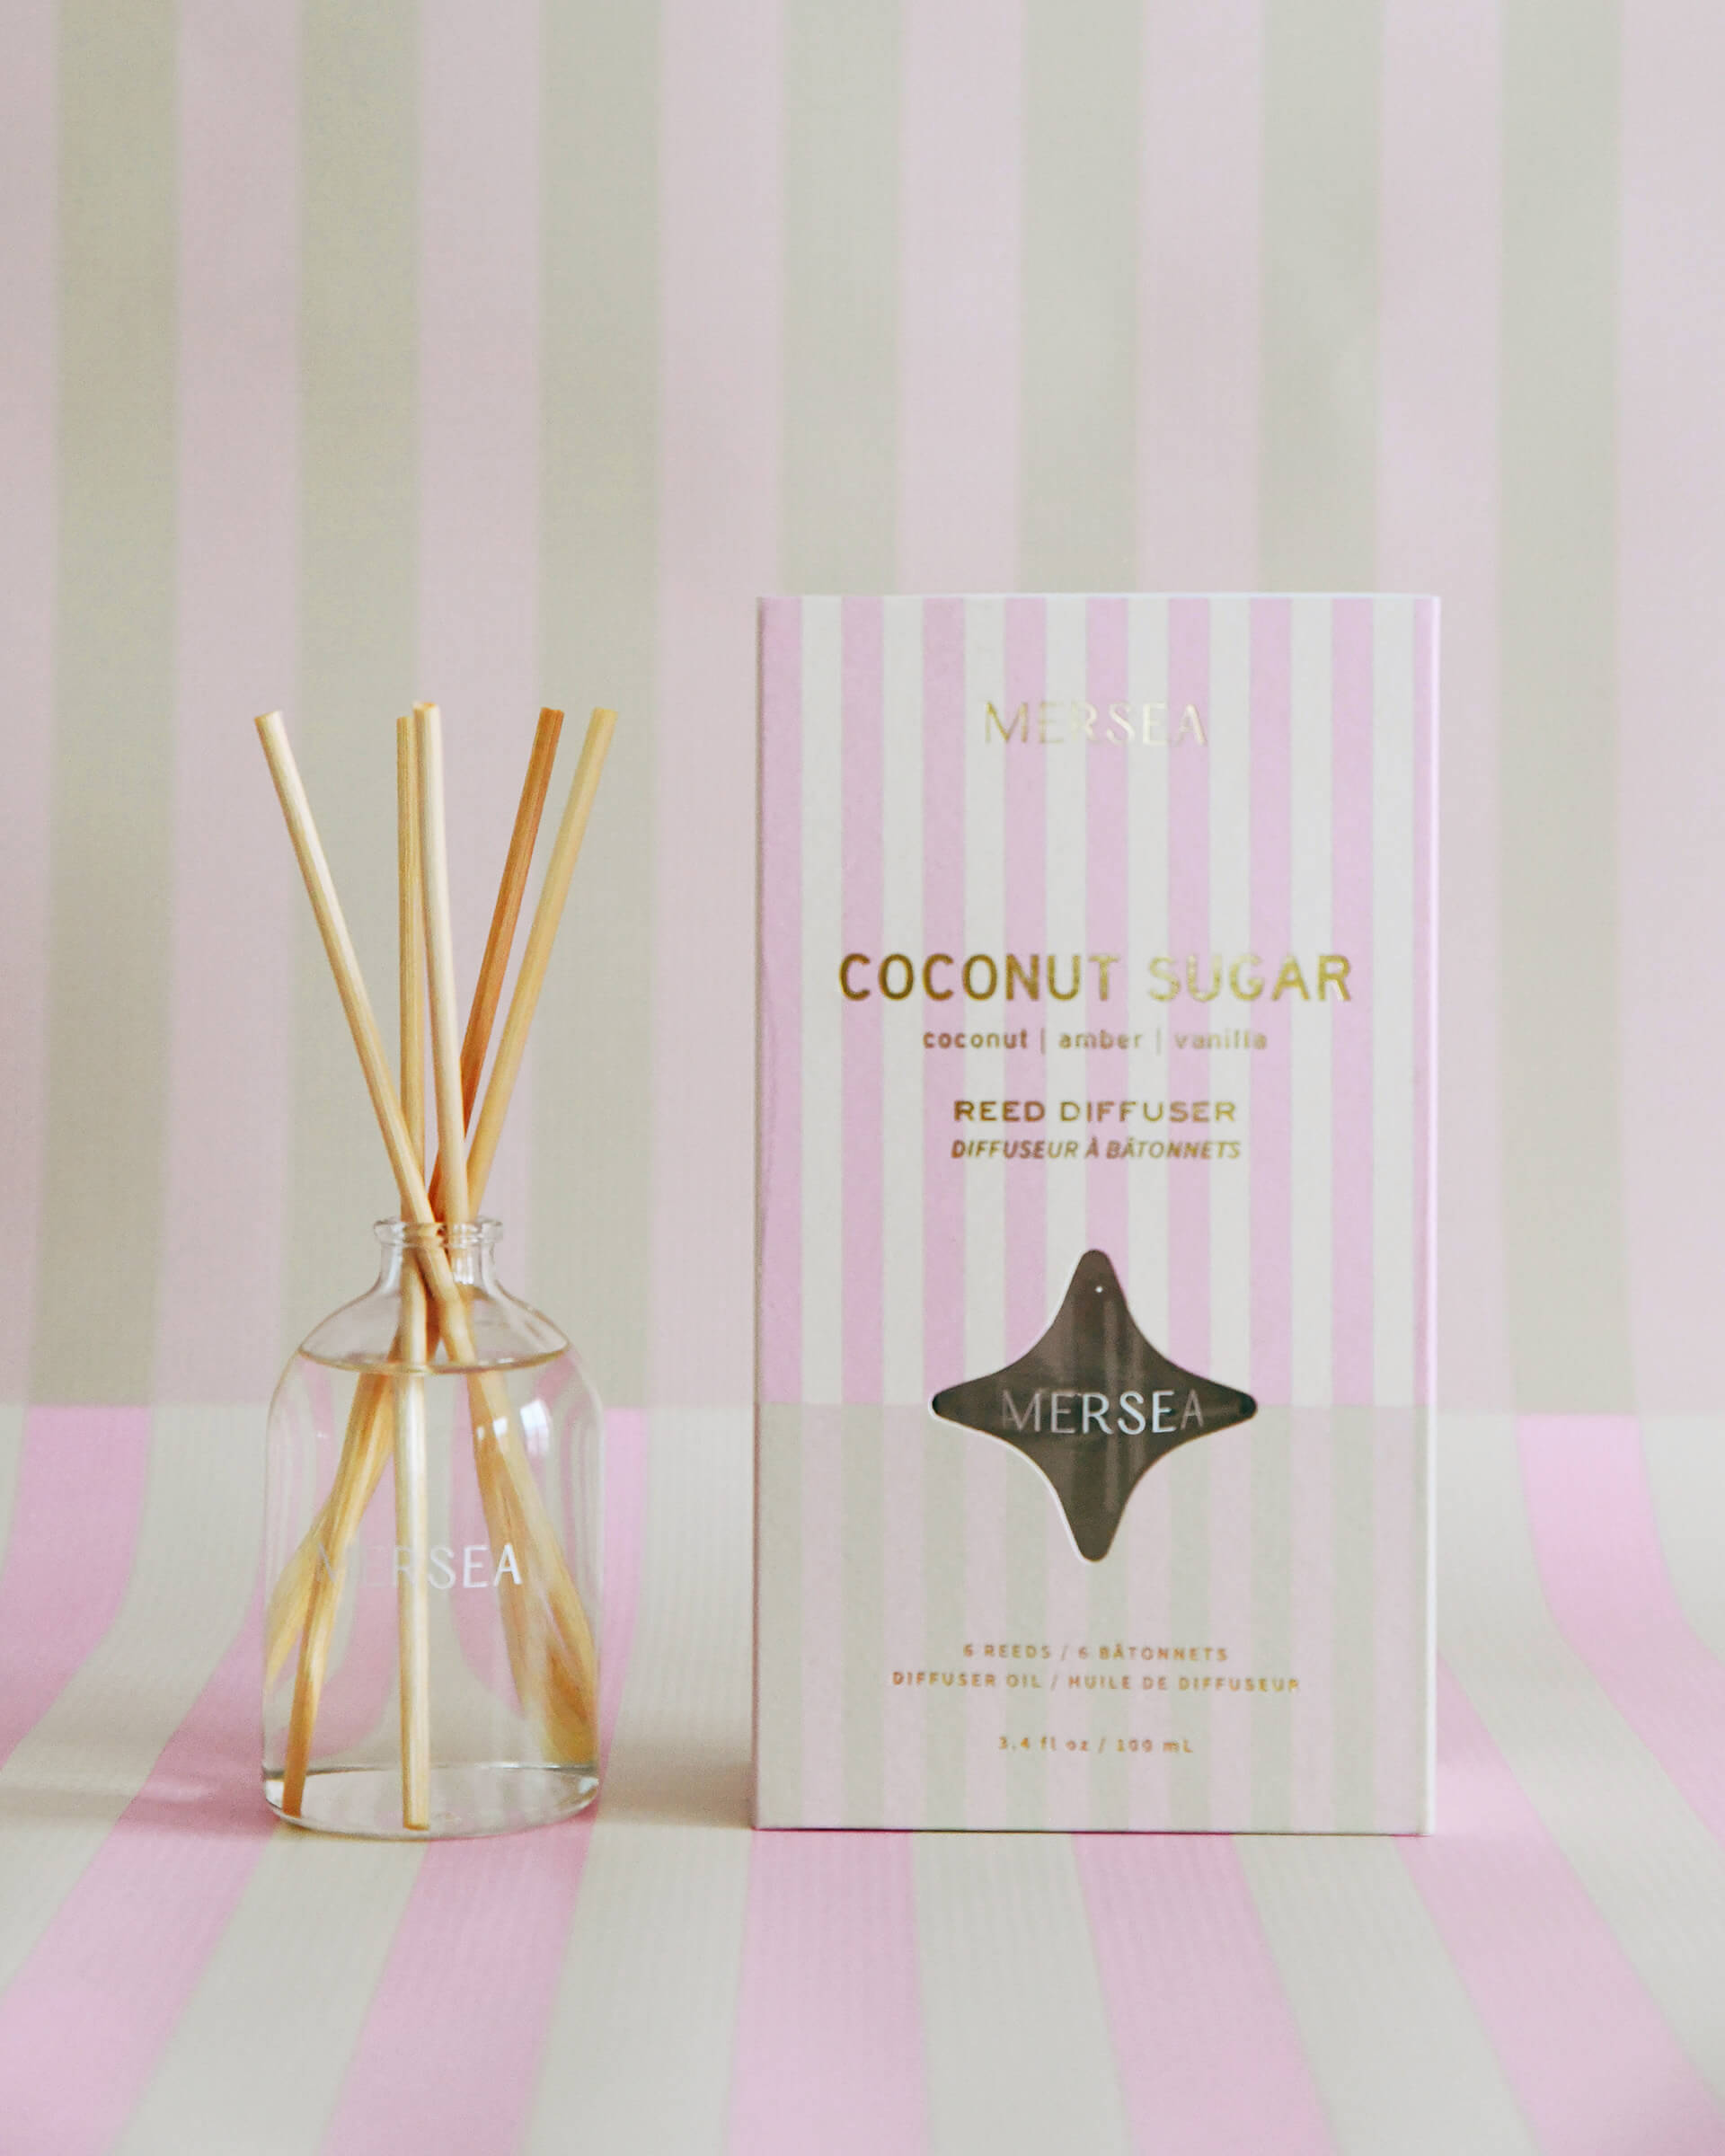 Coconut Sugar reed diffuser boxed in pink, green and white stripes on the same striped background 